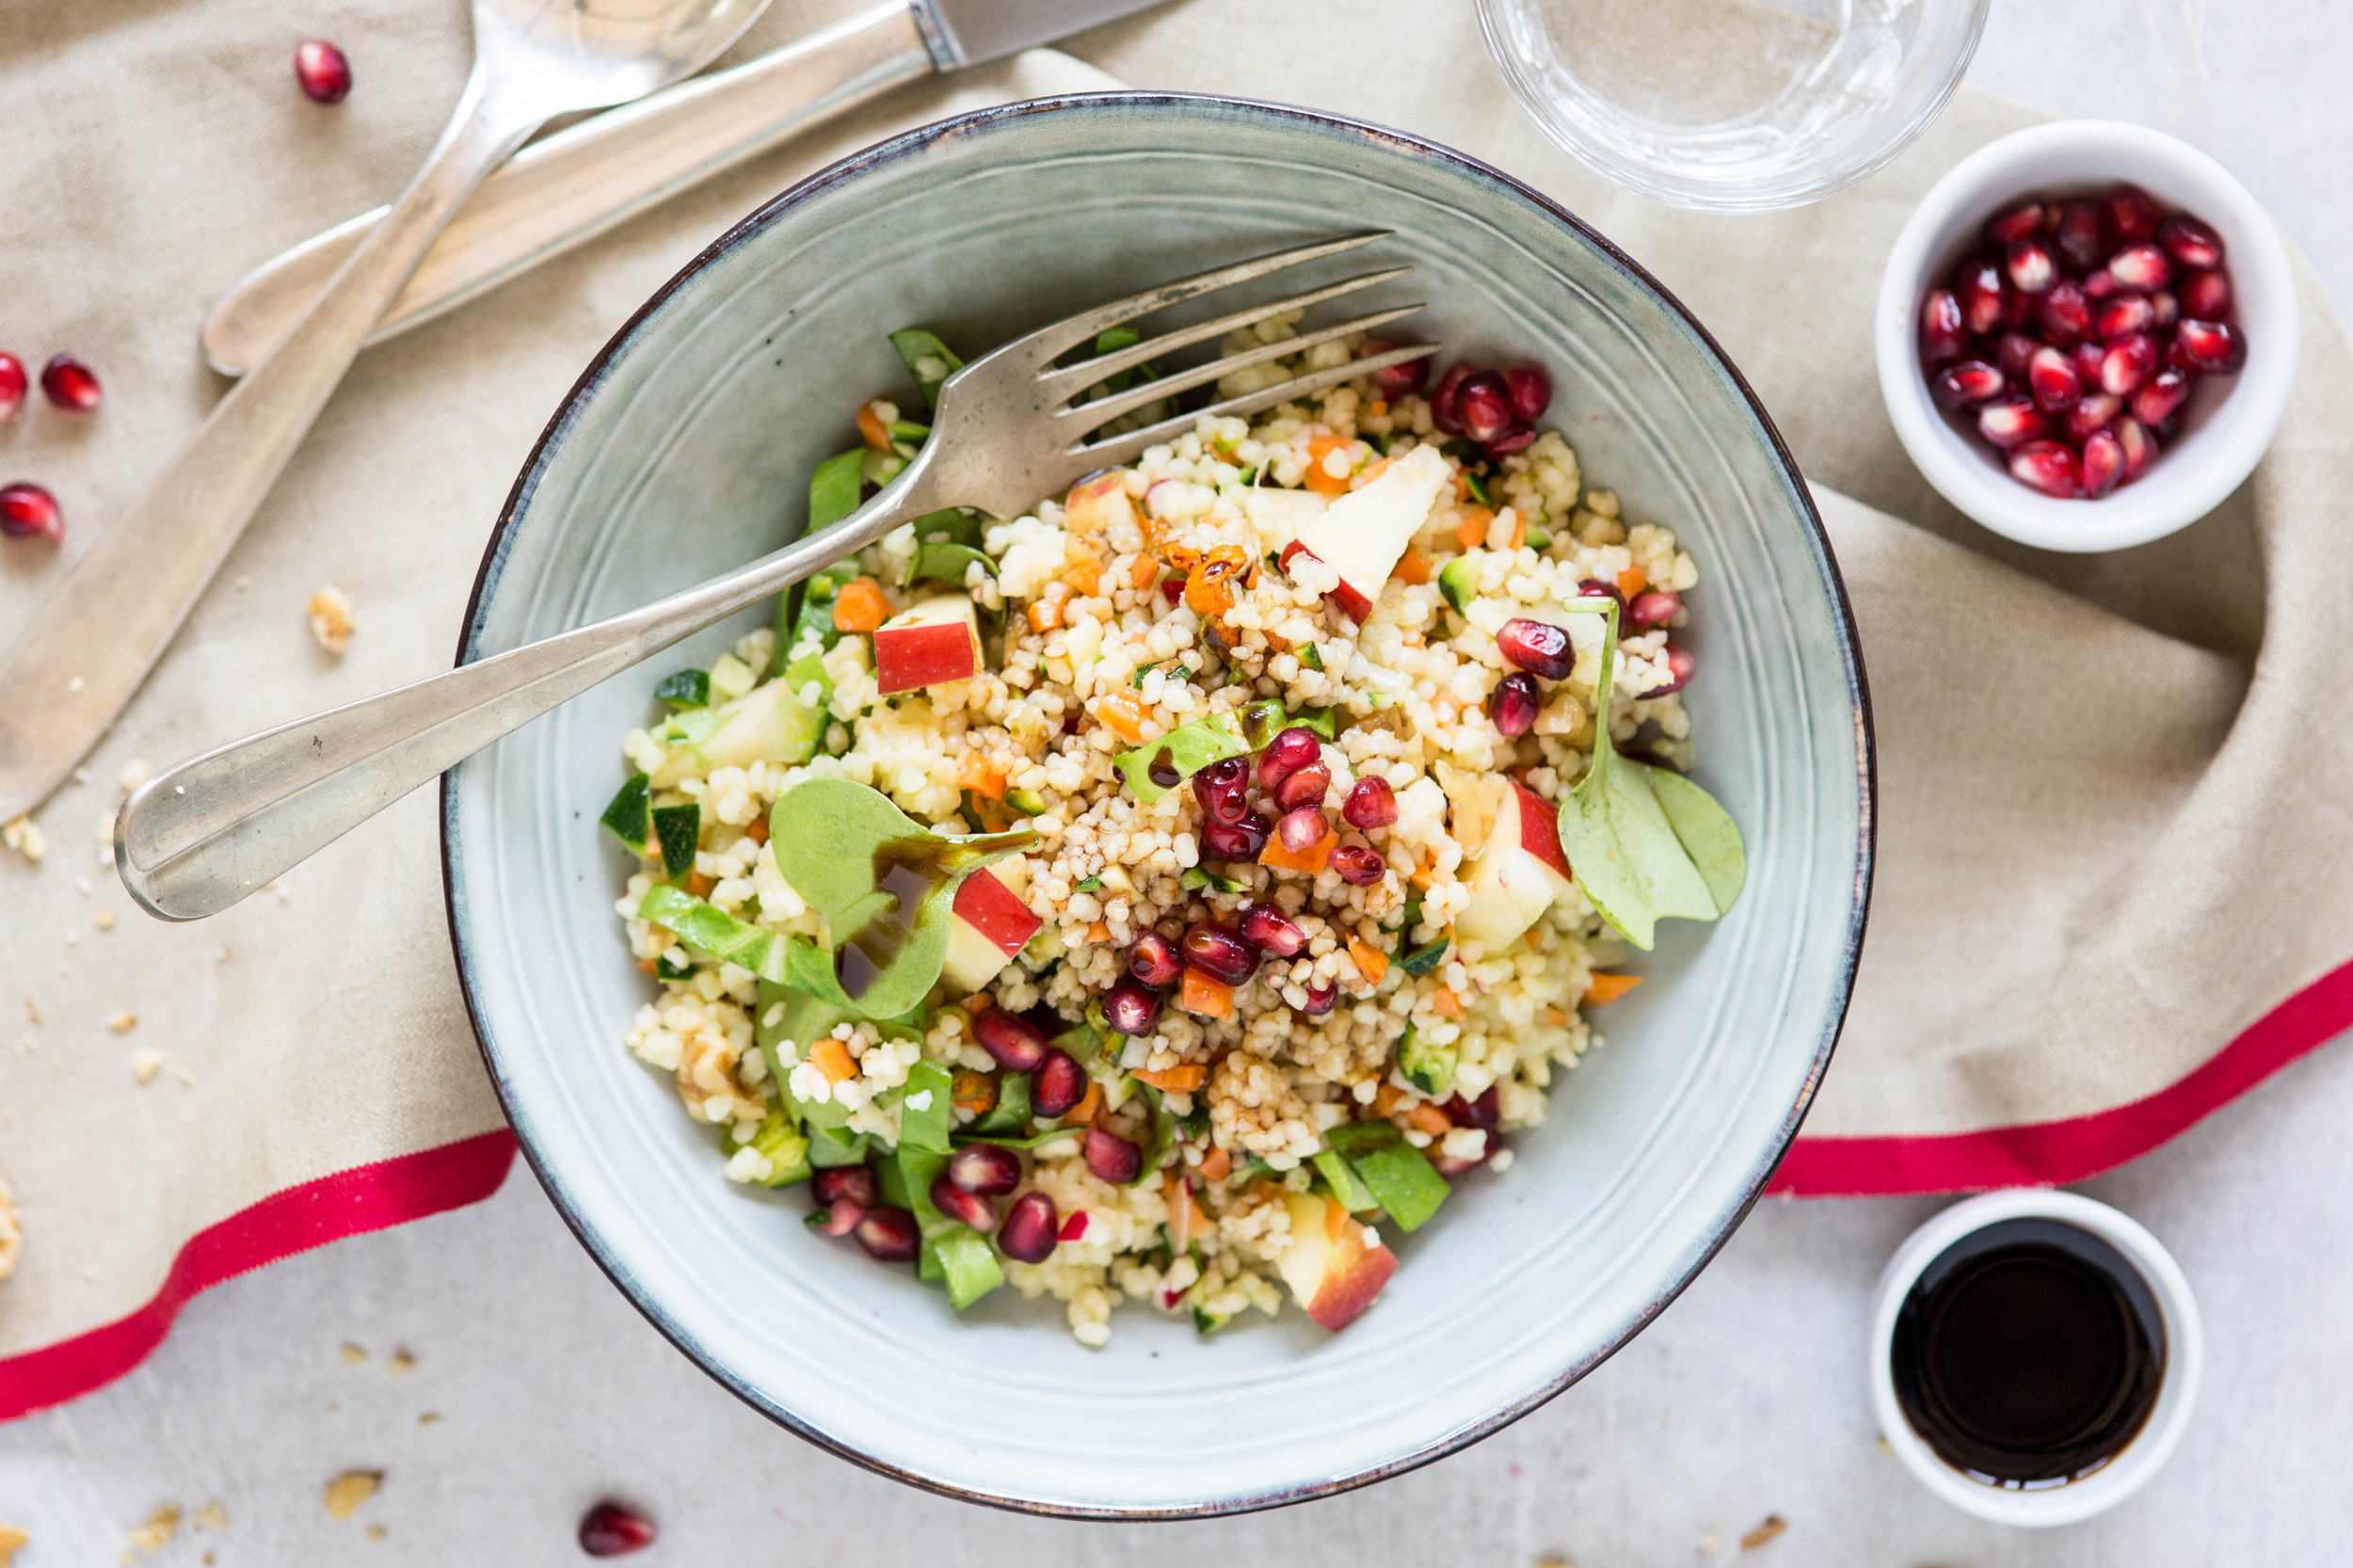 Cous cous salad with raw vegetables, pomegranate and walnuts